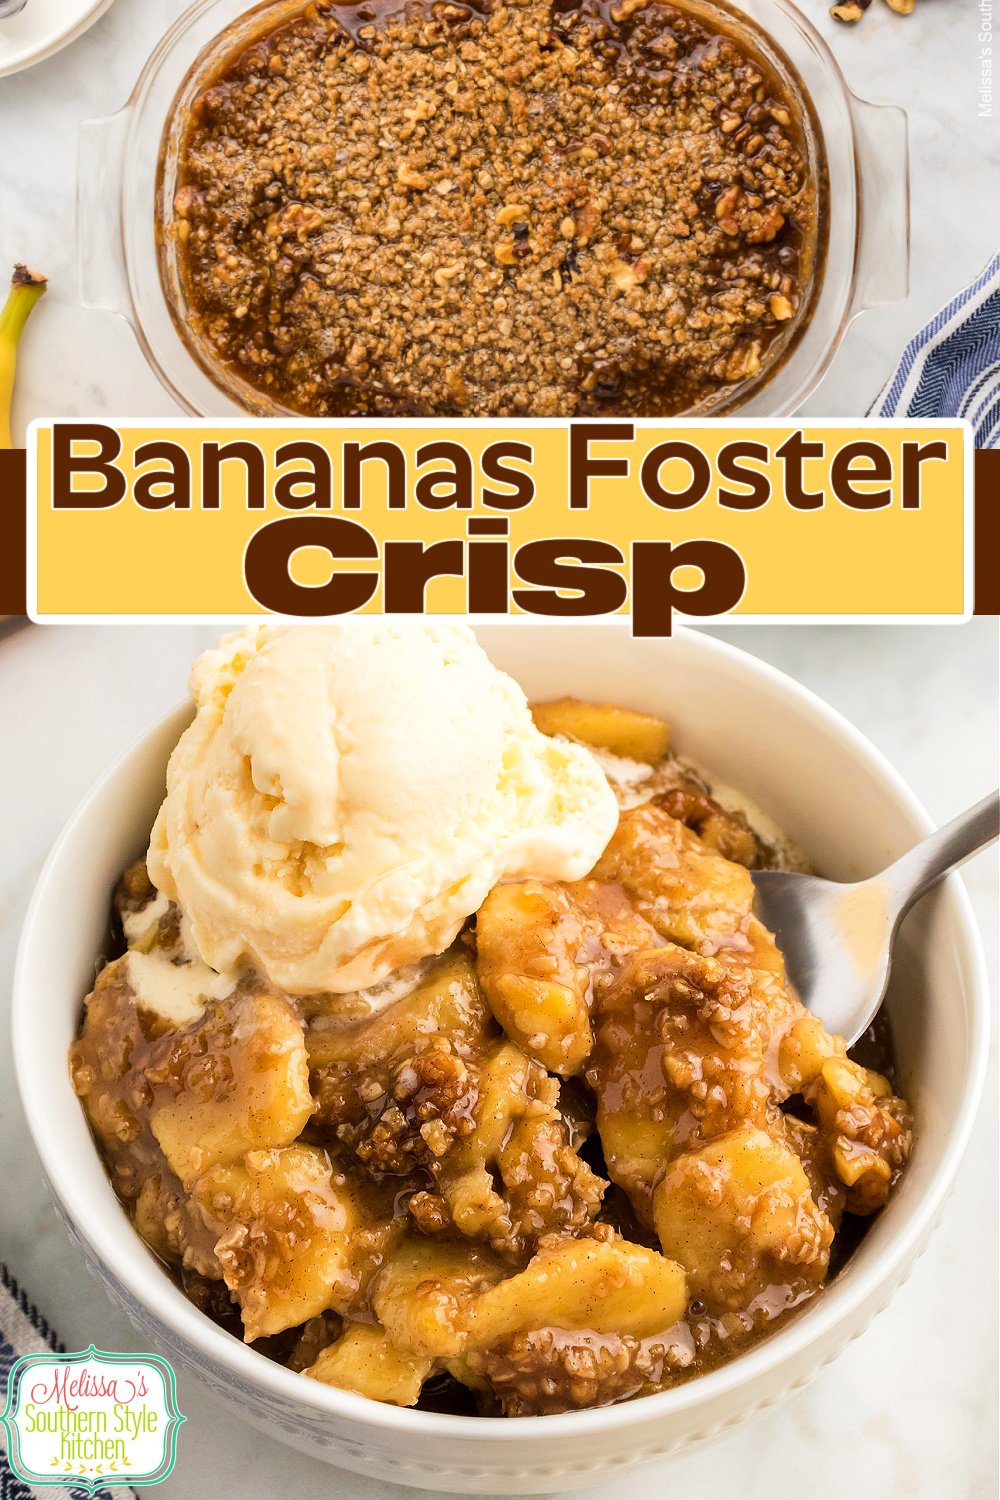 This Bananas Foster Crisp is a riff on a NOLA classic that features bananas covered in a rich caramel sauce and baked with a crispy topping. #bananasfoster #bananadesserts #bananacrisp #caramel #bananas #crisprecipes #southerndesserts #NOLA #mardigras via @melissasssk